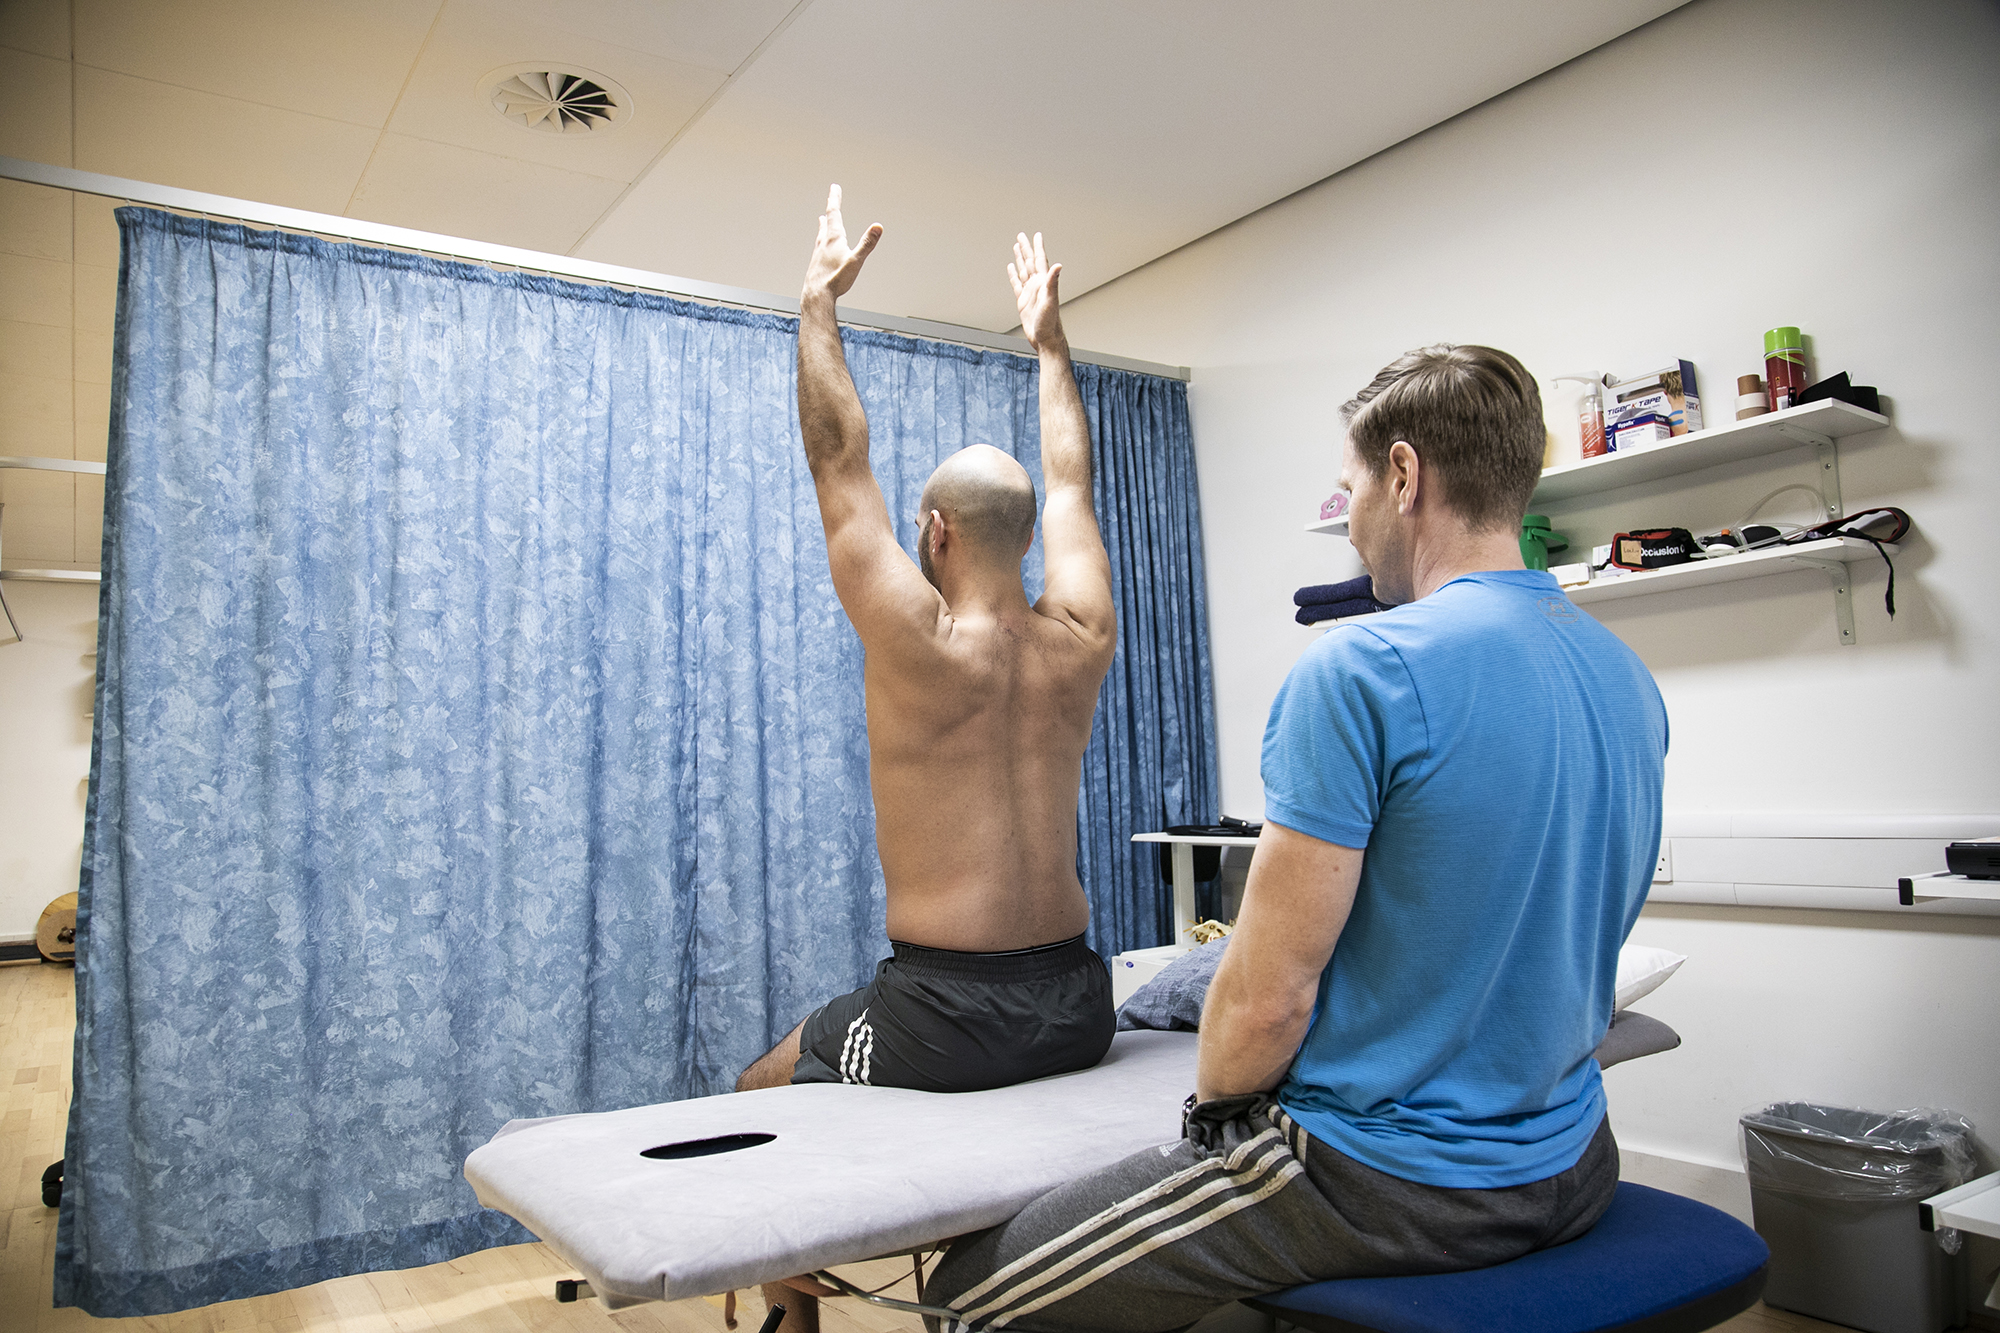 Male dancer sitting on physio bed with back to camera and arms up in the air, with male physiotherapist looking at dancer in an examination. With blue curtain in the background and a shelf of physio equipment. 